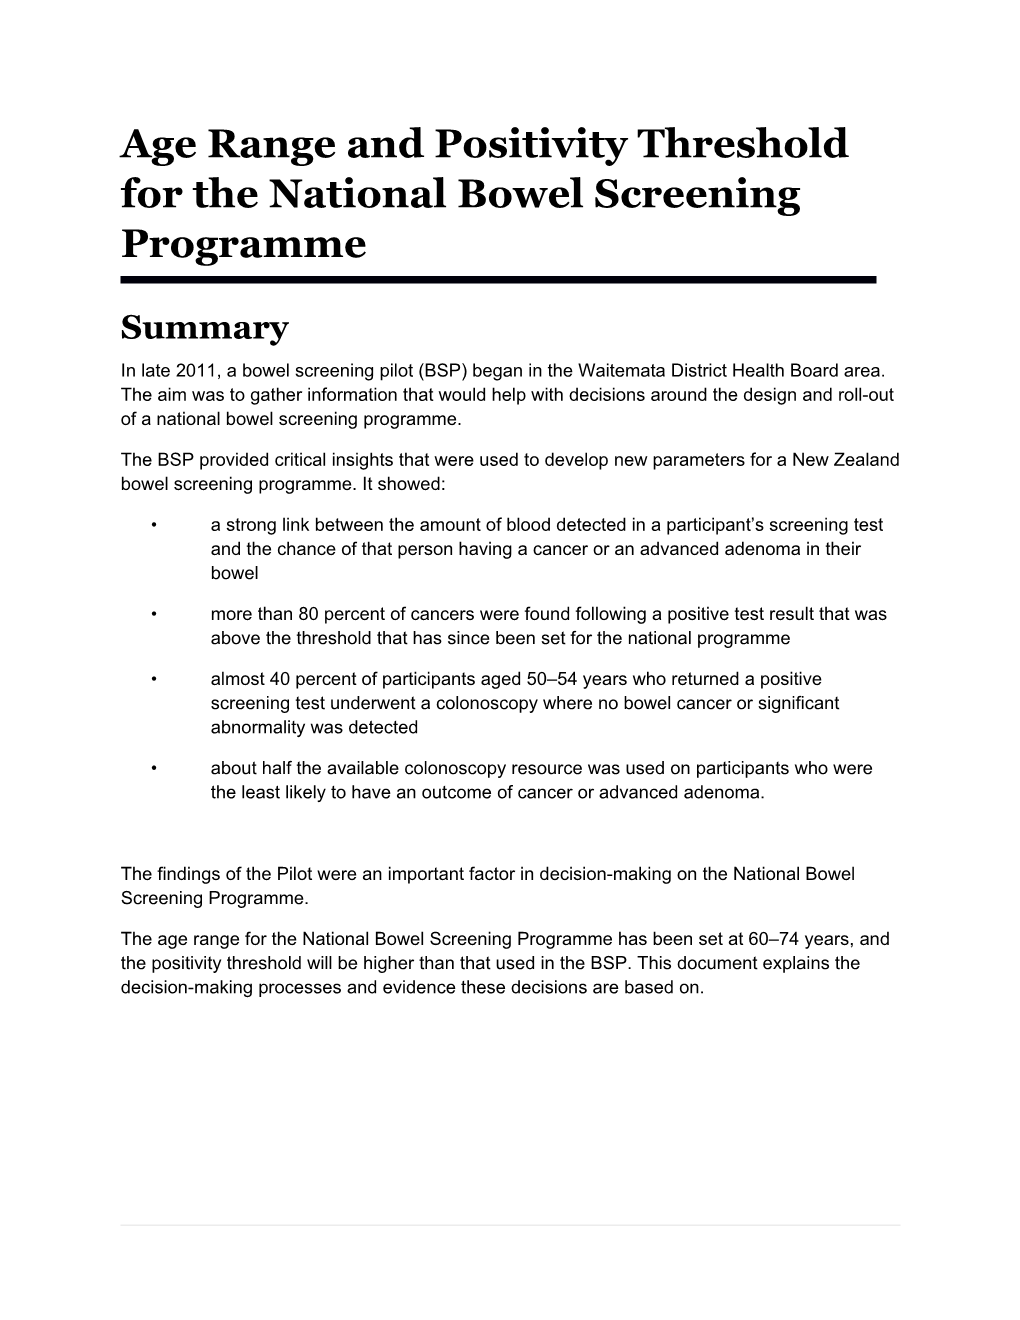 Age Range and Positivity Threshold for the National Bowel Screening Programme